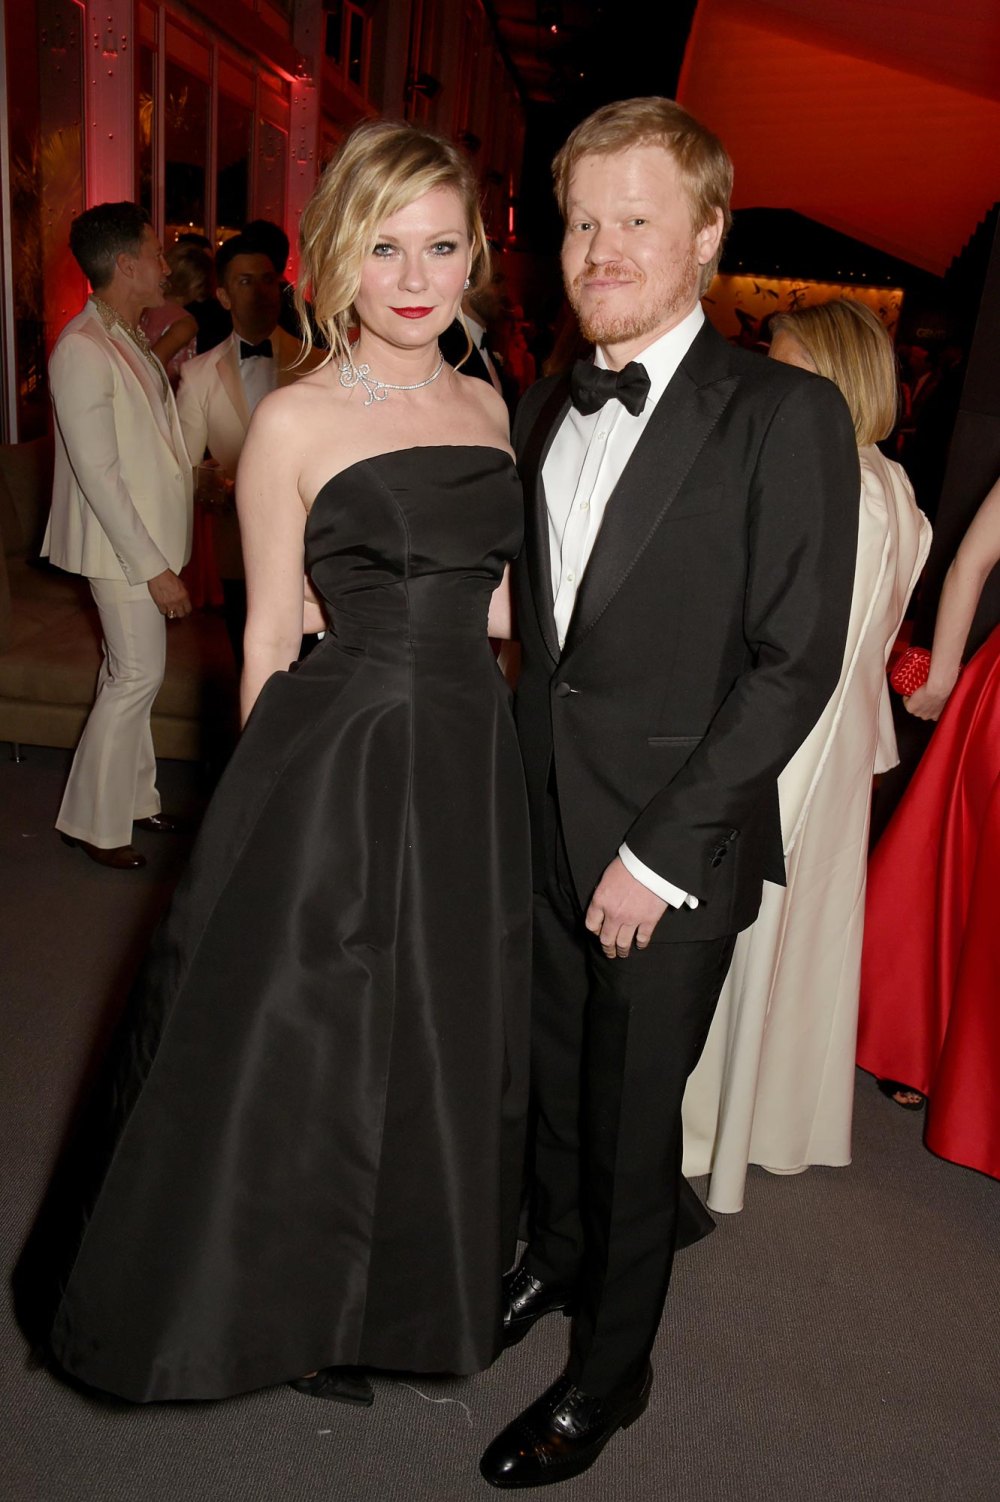 Jesse Plemons and Kirsten Dunst Bring the Heat to the 2023 Emmy Awards Red Carpet 647